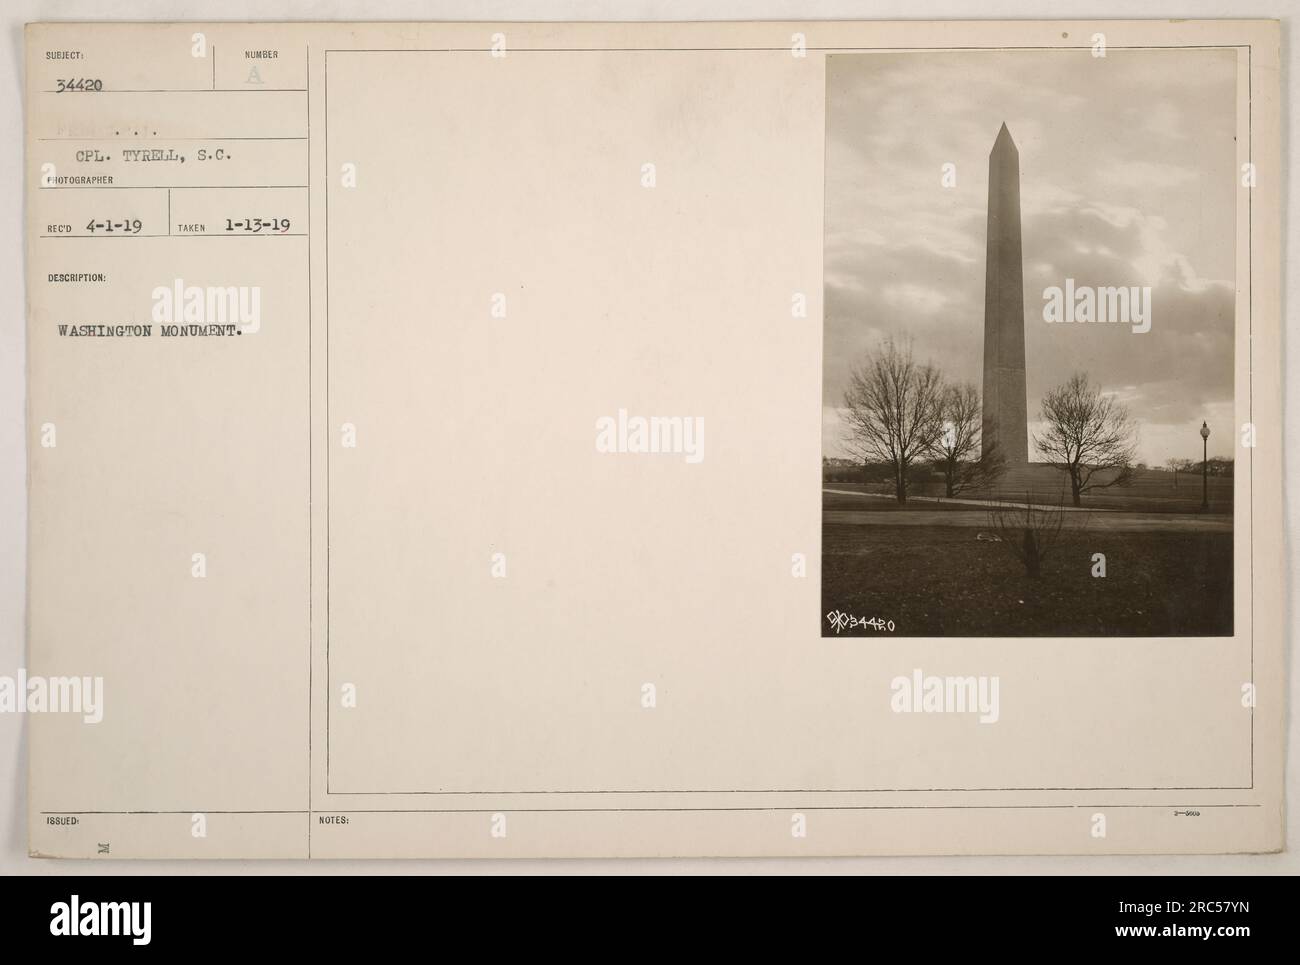 Corporal Tyrell of the US military captured this image of the iconic Washington Monument during World War One. The photograph was taken on January 13, 1919, and it is part of the official collection under the issued number 34420. Stock Photo